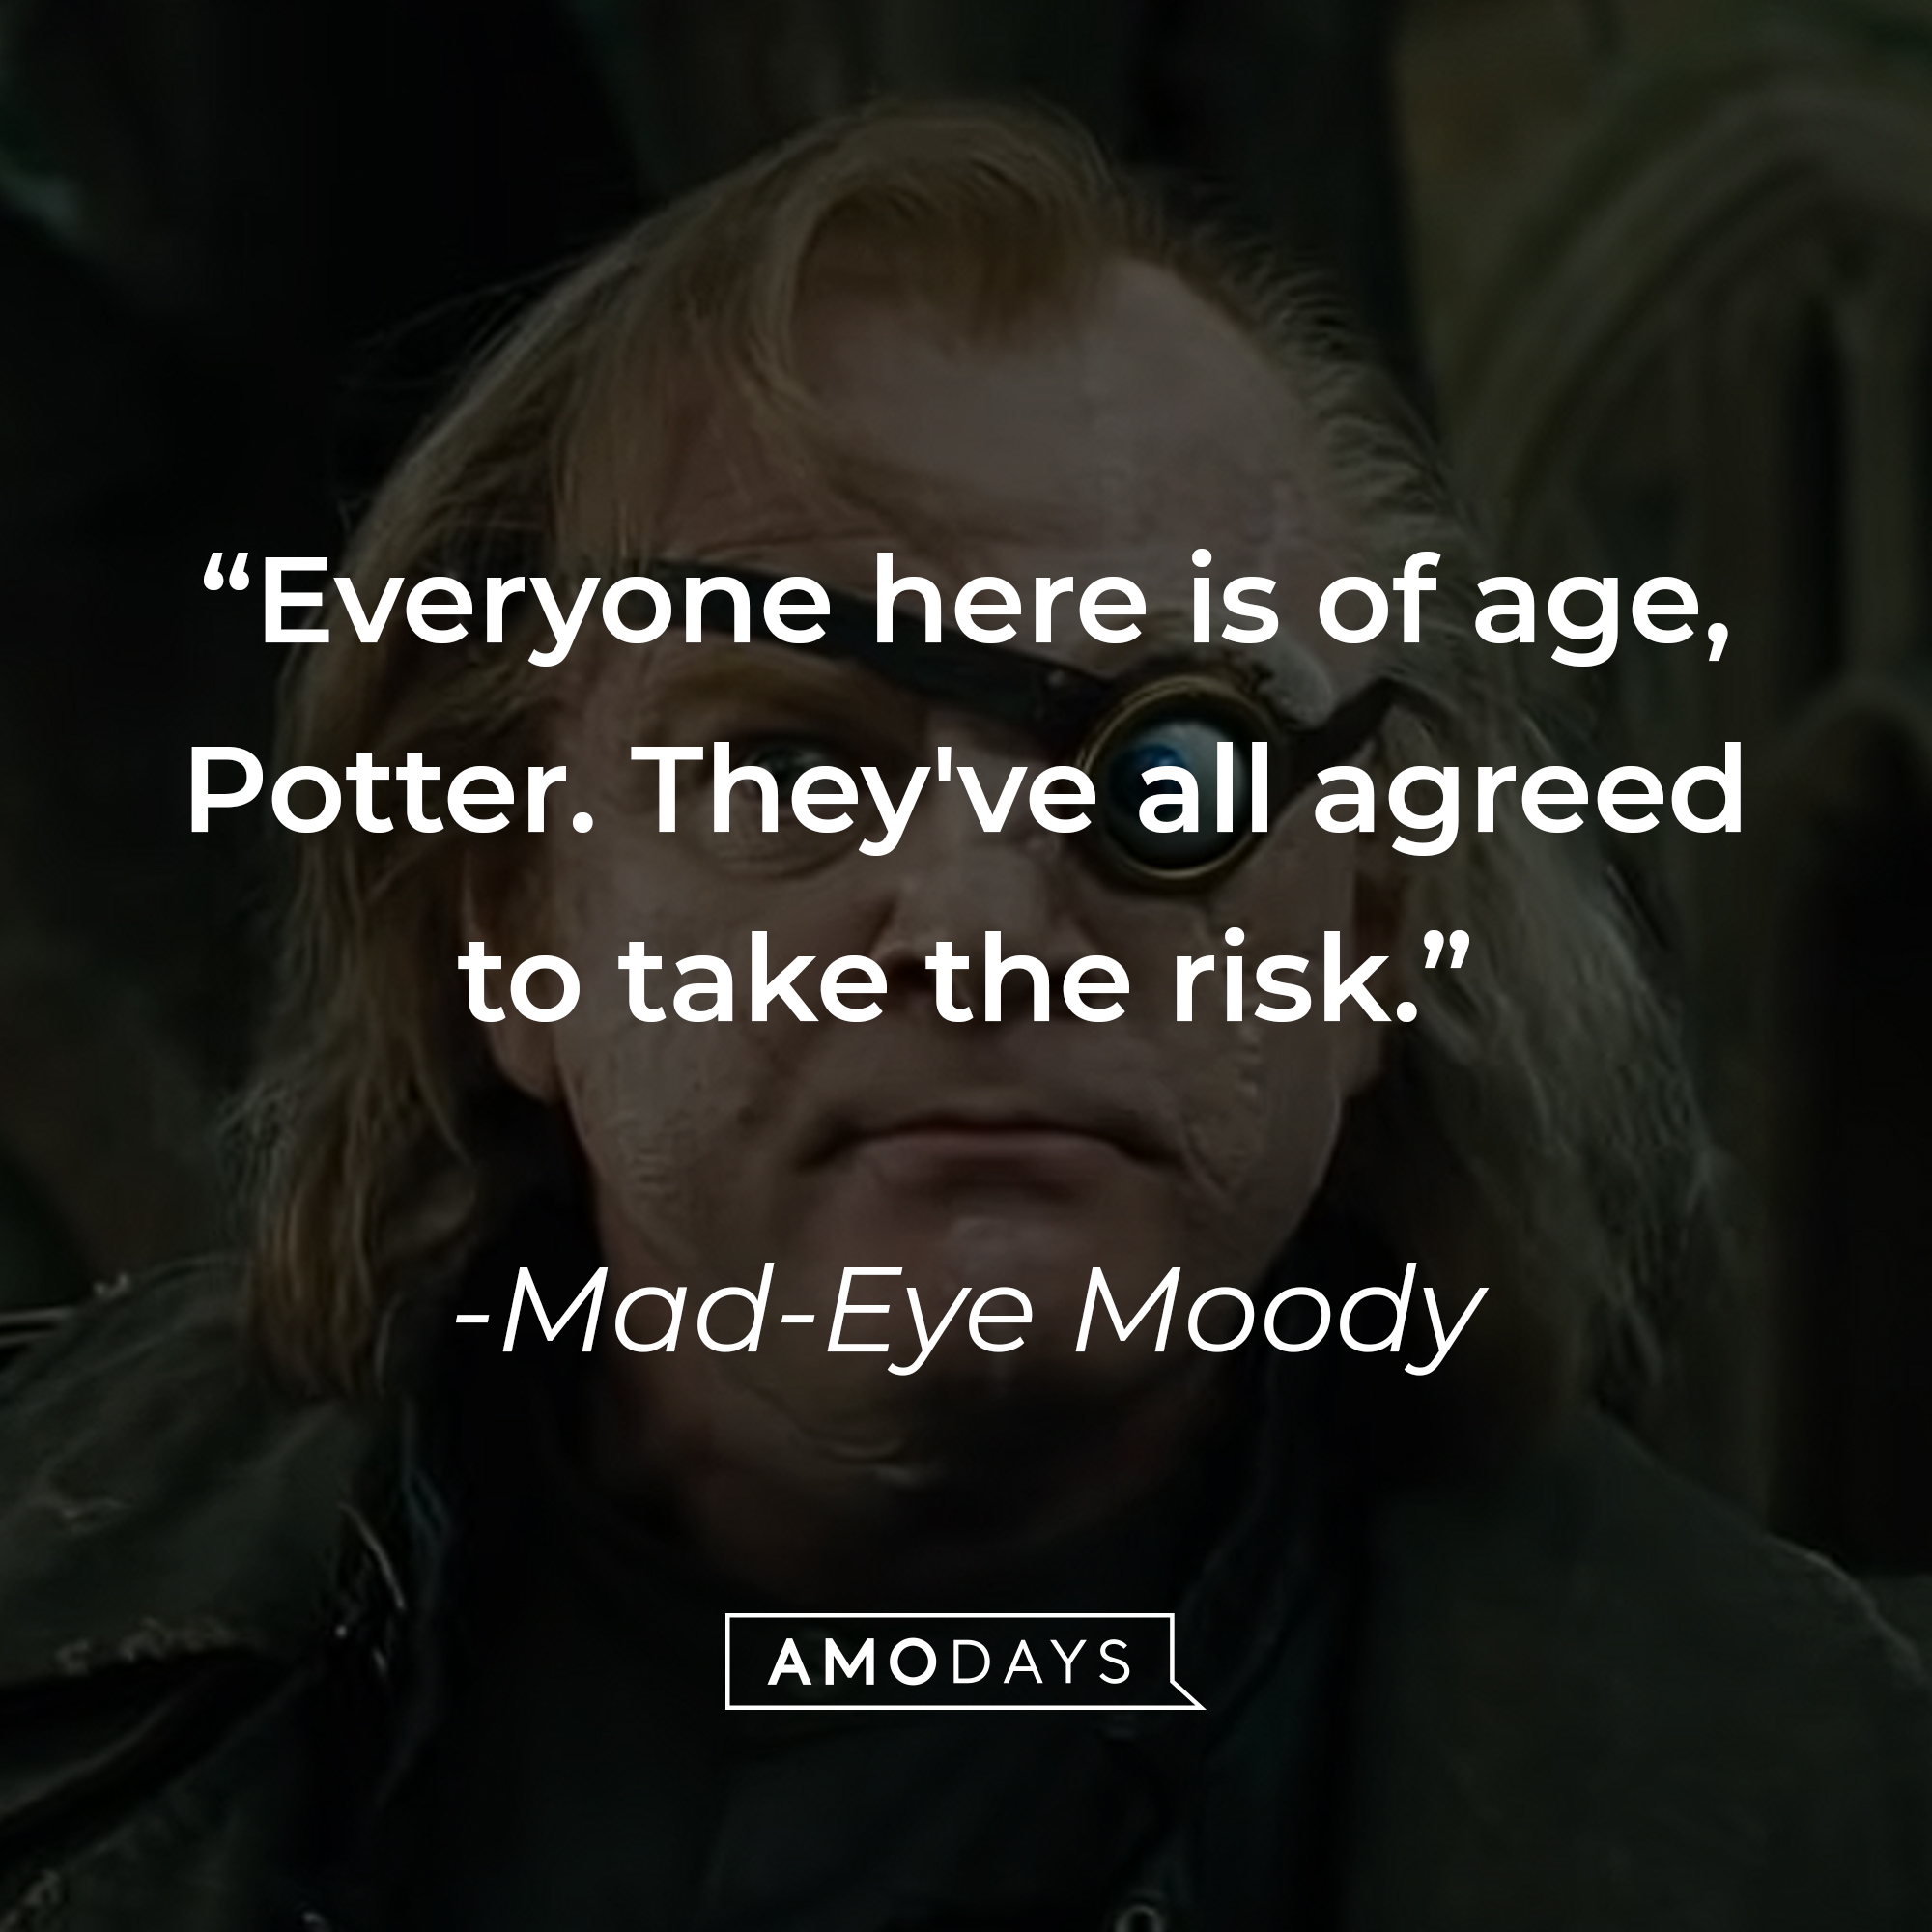 Mad-Eye Moody's quote: "Everyone here is of age, Potter. They've all agreed to take the risk." | Source: youtube.com/harrypotter